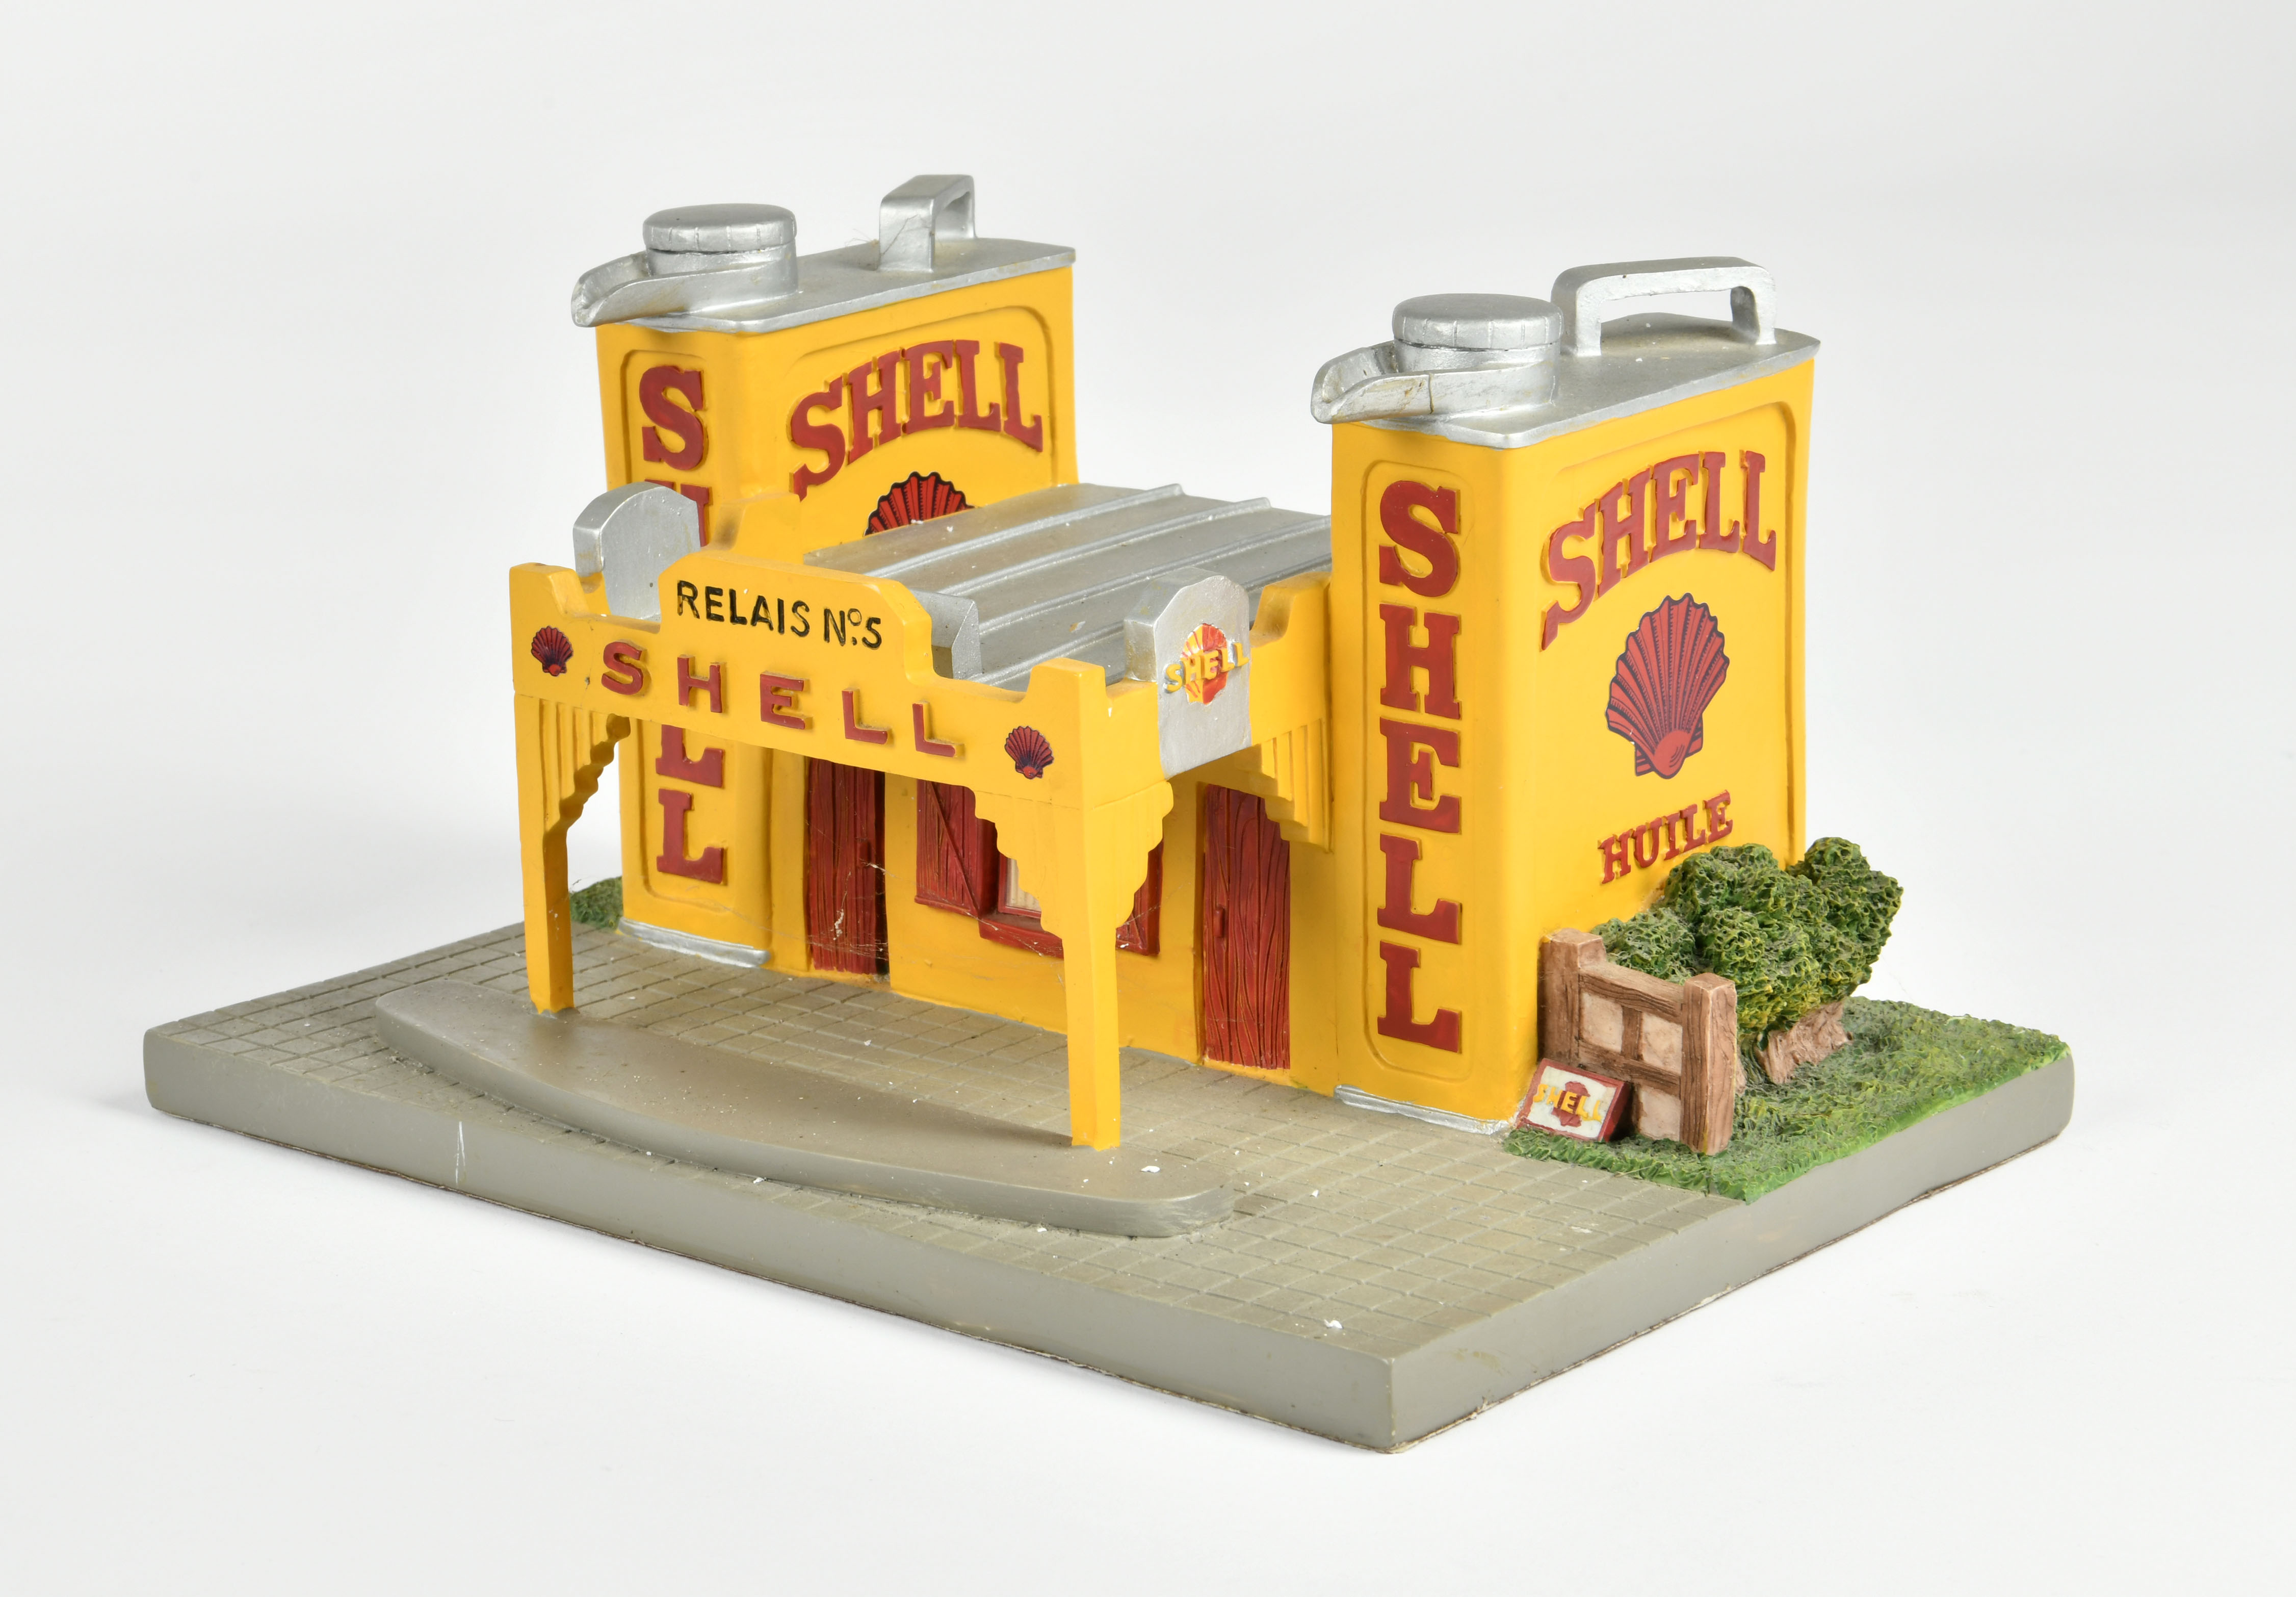 Shell petrol station, diecast, 25,5x18,5x14cm, dusty otherwise very good